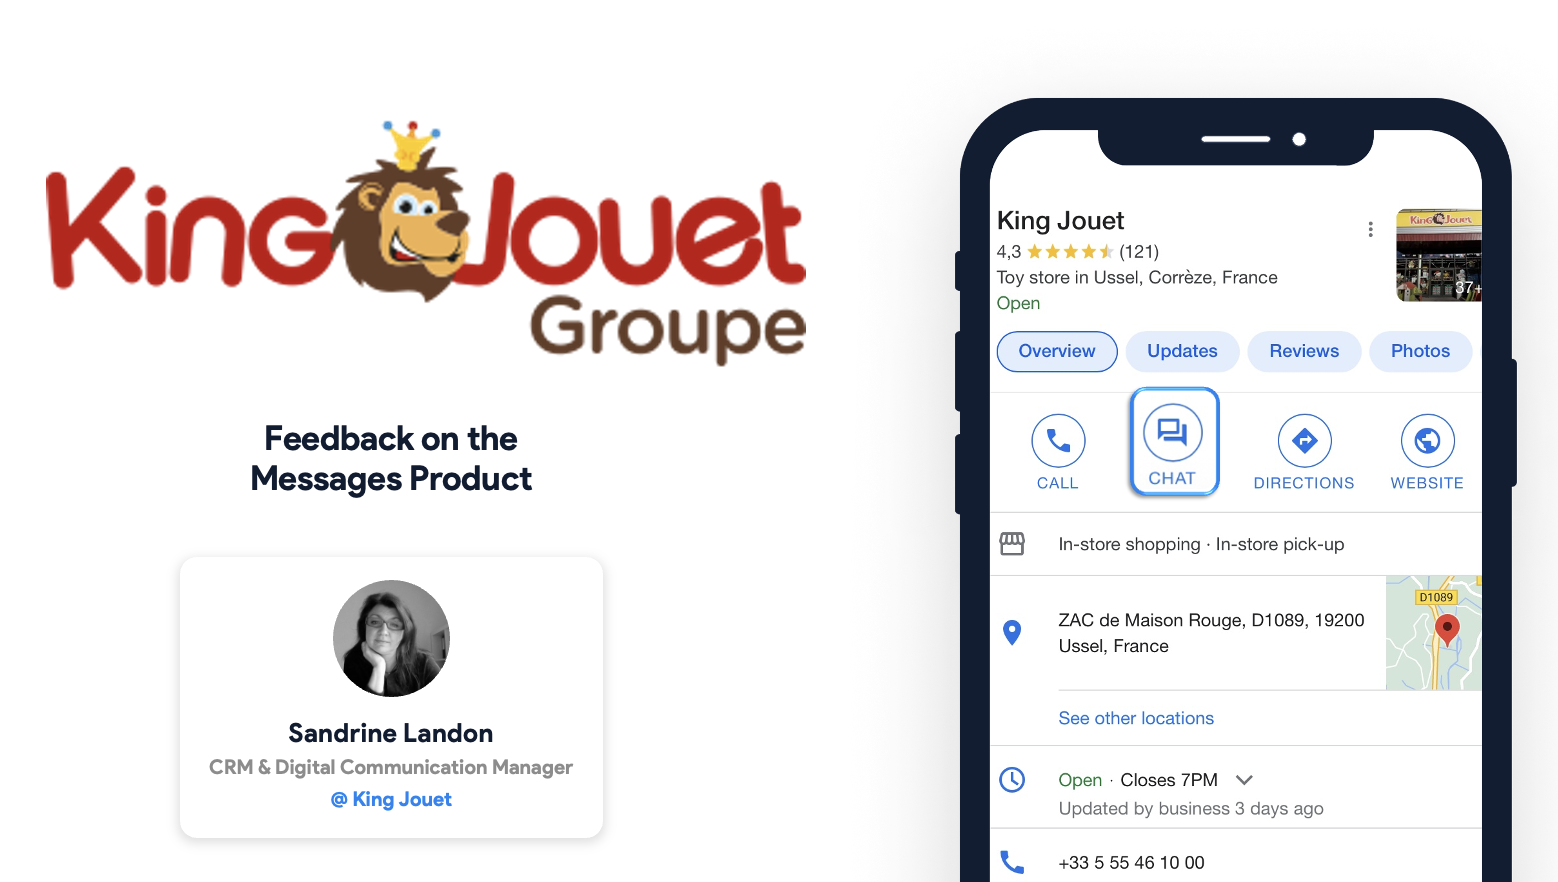 King Jouet's experience with Messaging